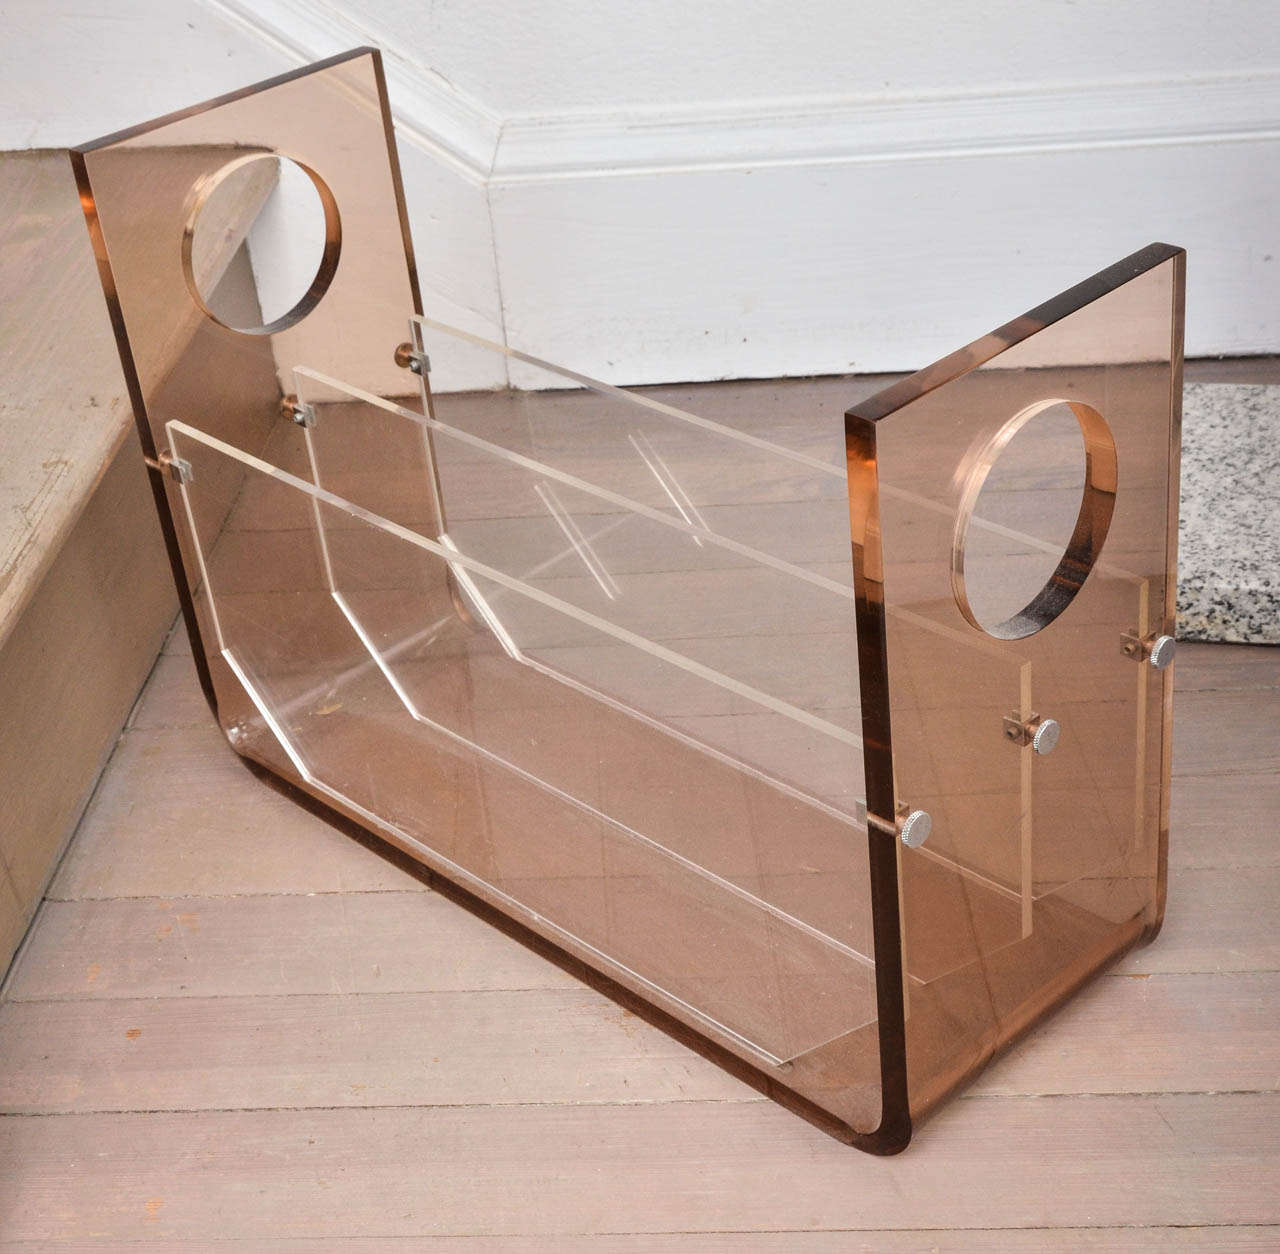 Lucite Magazine rack with 2 available priced individually